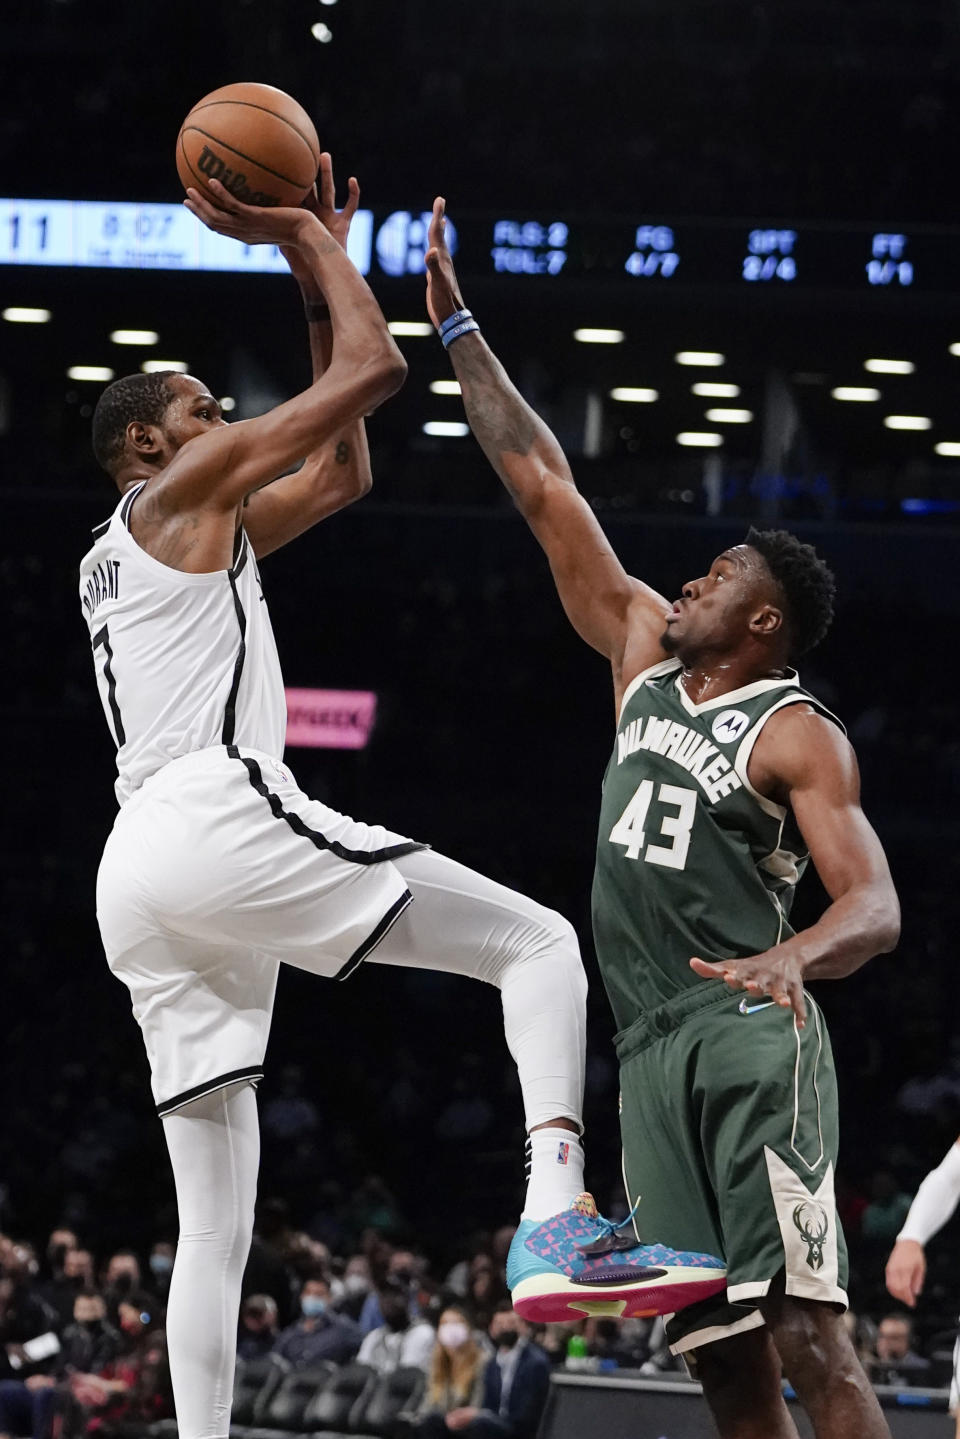 Brooklyn Nets' Kevin Durant (7) shoots over Milwaukee Bucks' Thanasis Antetokounmpo (43) during the first half of a preseason NBA basketball game Friday, Oct. 8, 2021, in New York. (AP Photo/Frank Franklin II)